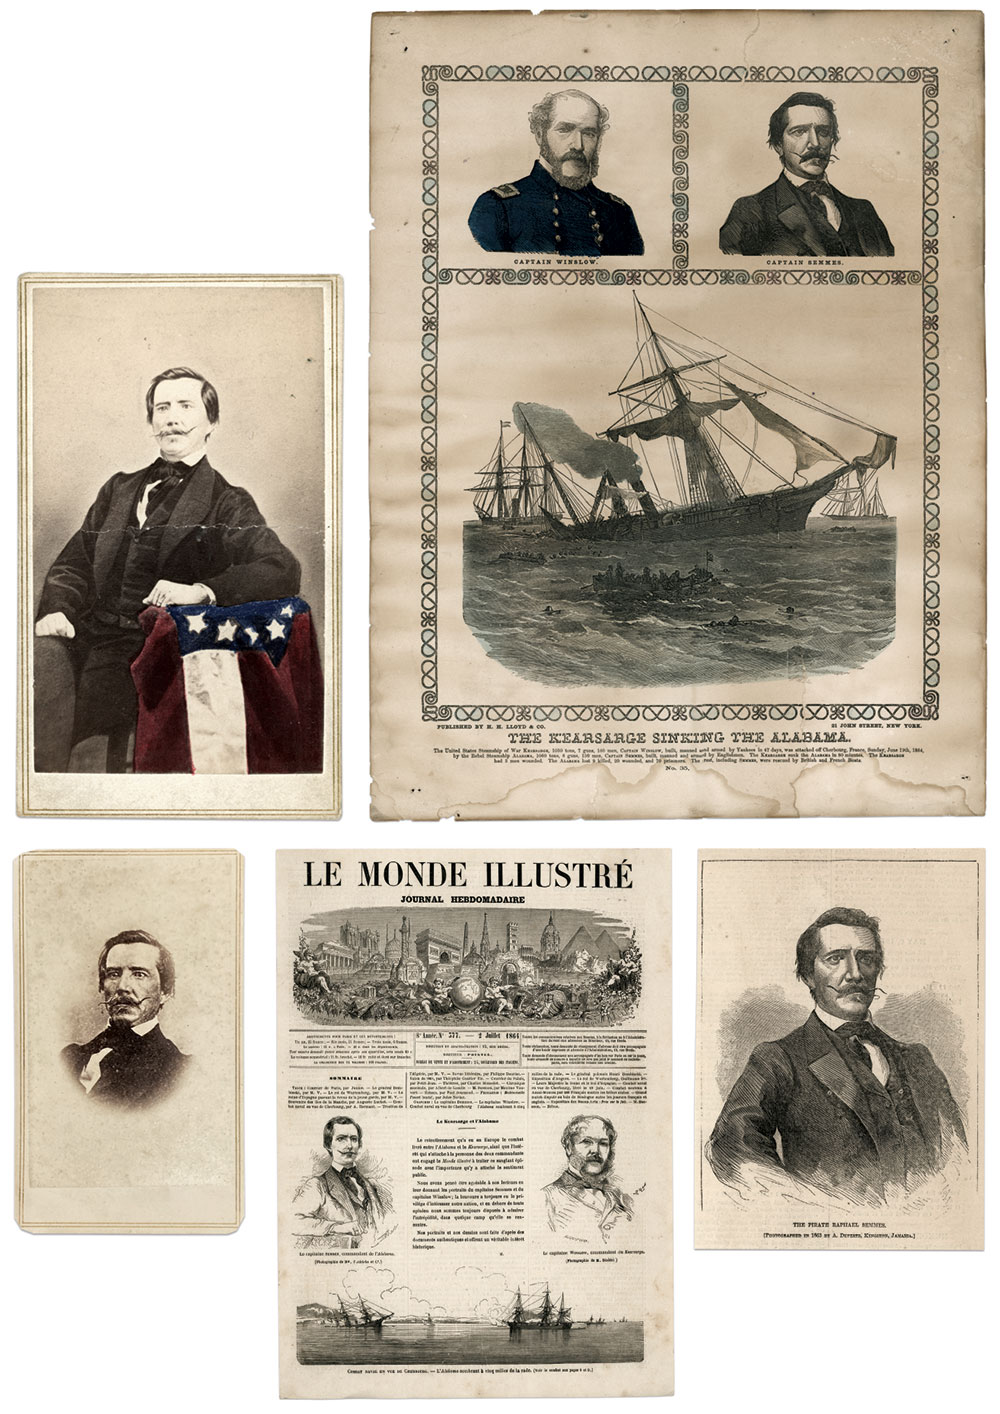 This portrait, top left, by Adolphe Duperly, was used in various ways, as evidenced by the images on this page. Northern photographers pirated it in whole or as a vignette. It also appears in reverse in an engraving in the July 23, 1864, issue of Harper’s Weekly, the French newspaper Le Monde Illustrè, and a broadside published by H.H. Lloyd and Co. of New York City announcing the destruction of the Alabama. Cartes de visite by Charles D. Fredricks and Co. of New York City, CommanderGerald C. Roxbury, USN Retired Collection, and an unidentified photographer, author’s collection. Engravings from the author's collection.